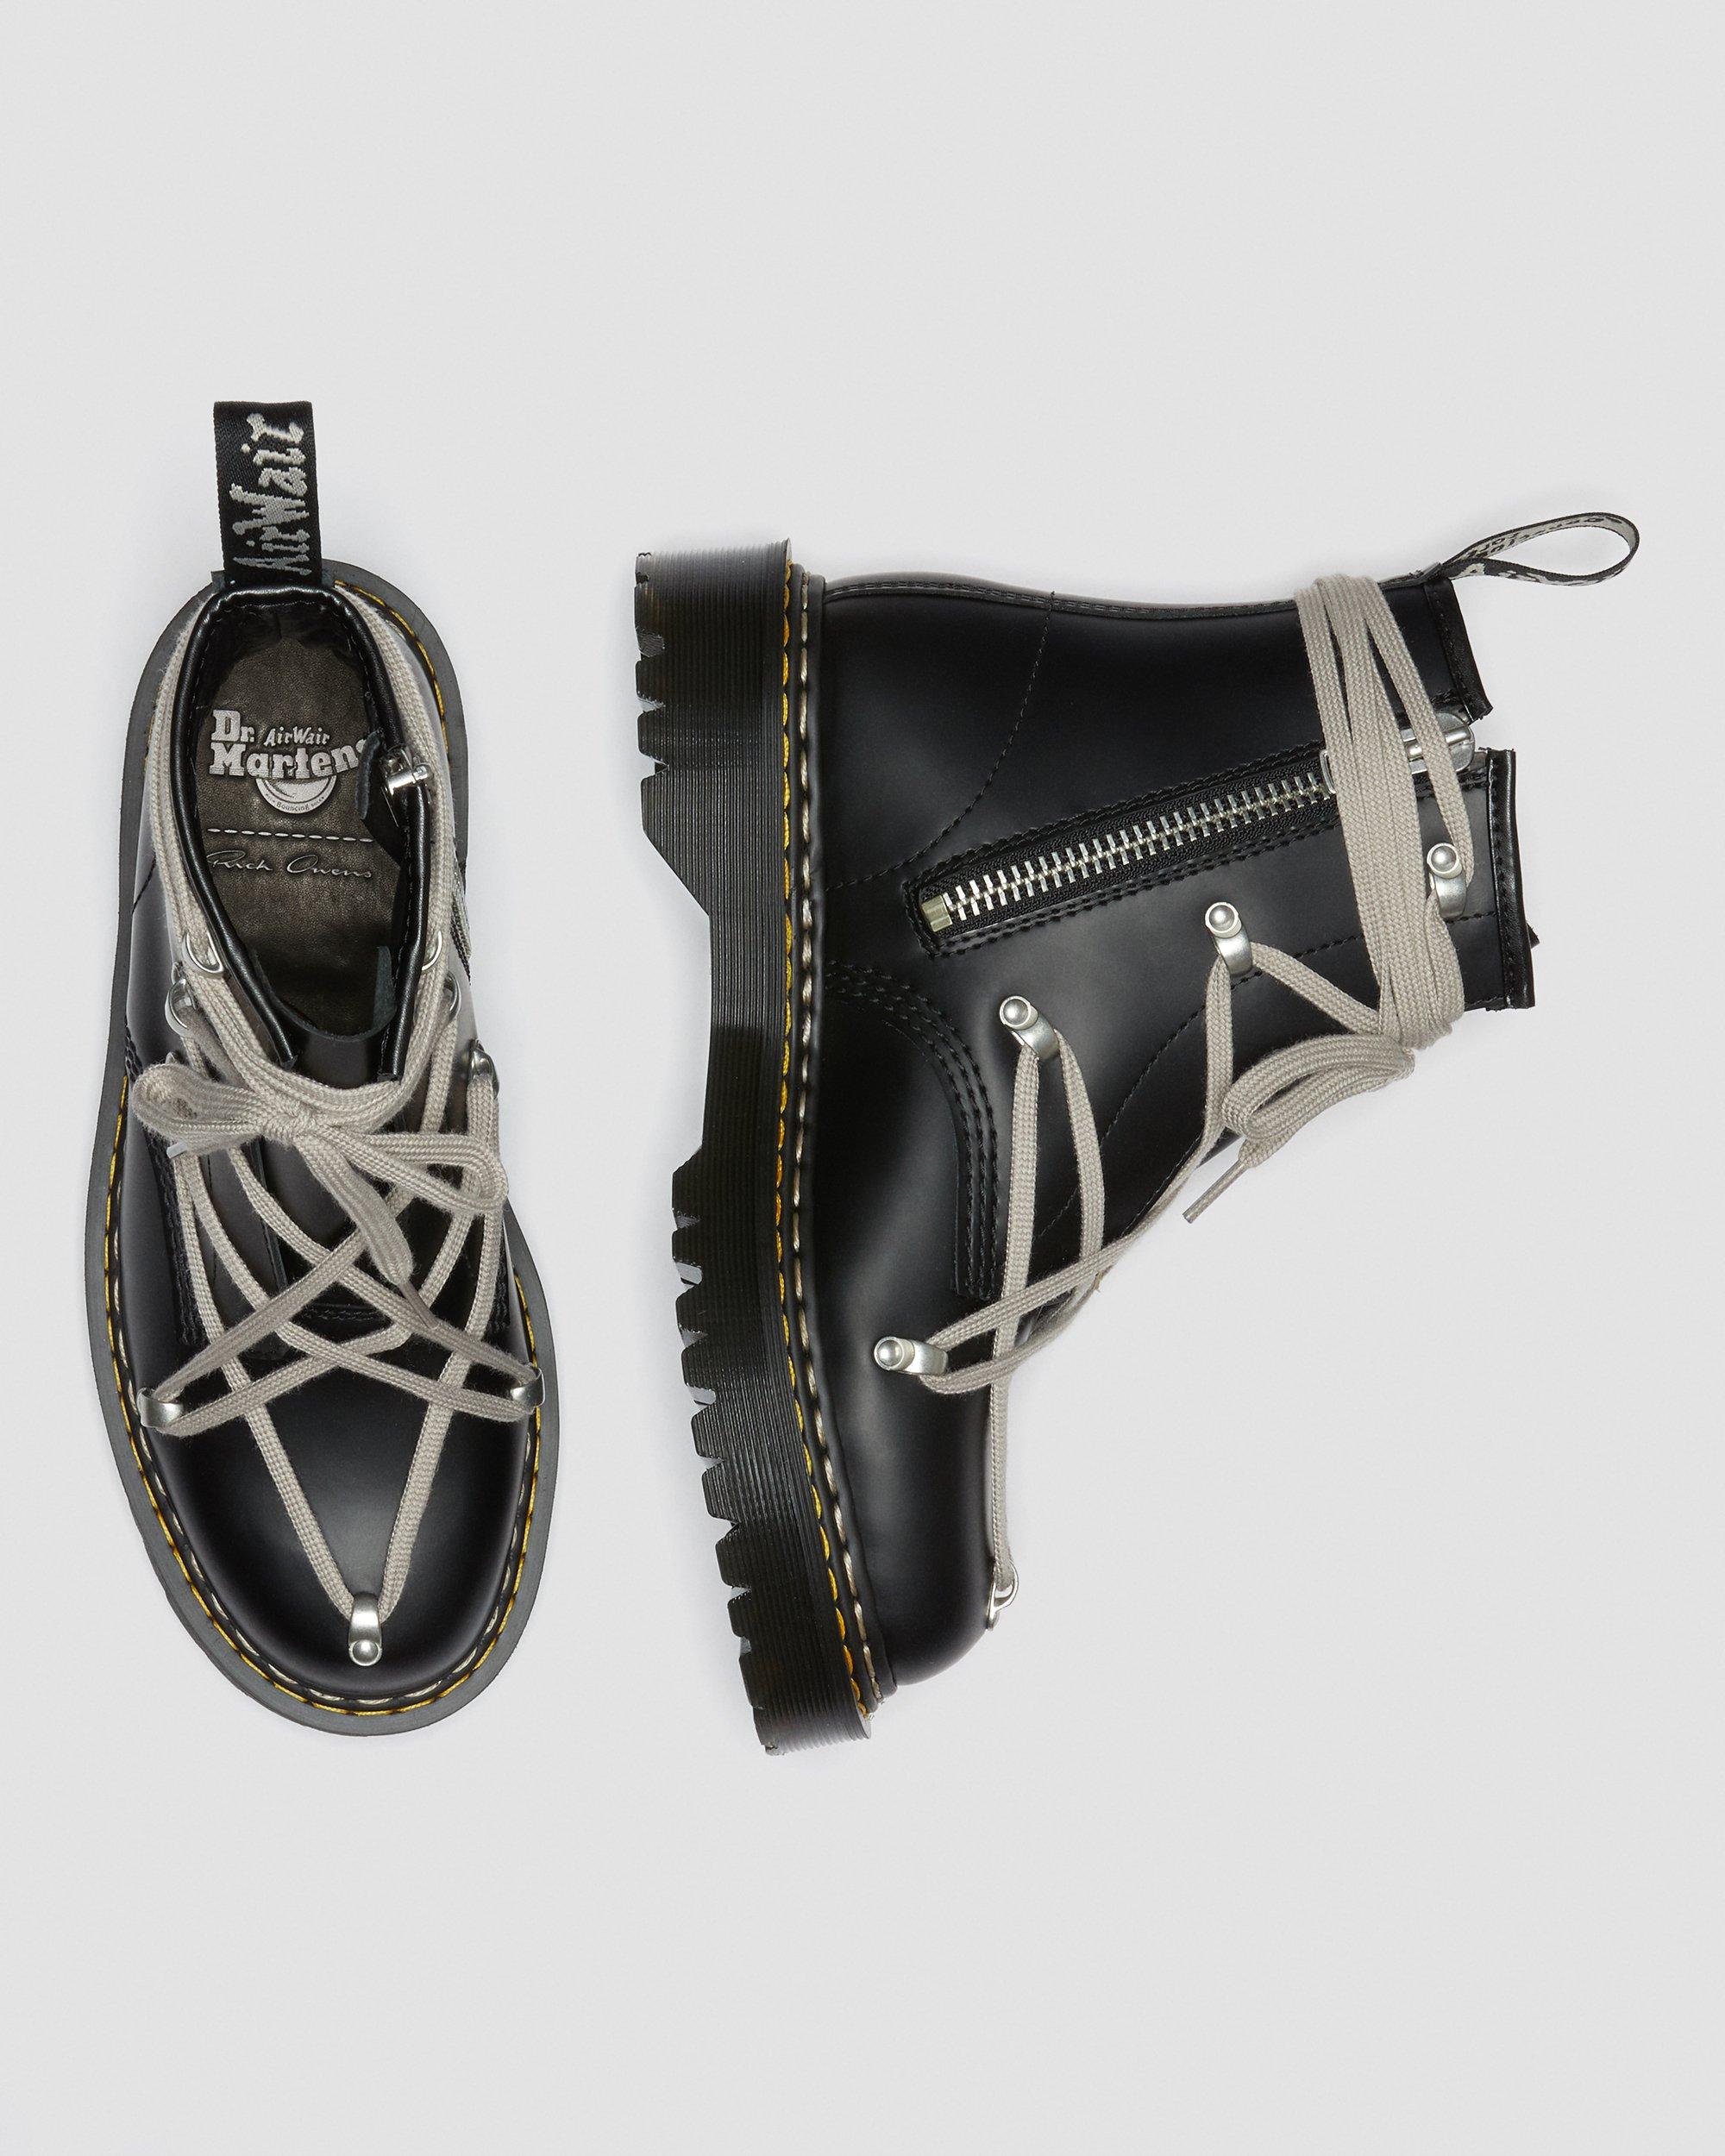 DR MARTENS Rick Owens 1460 Bex Leather Lace Up Boots